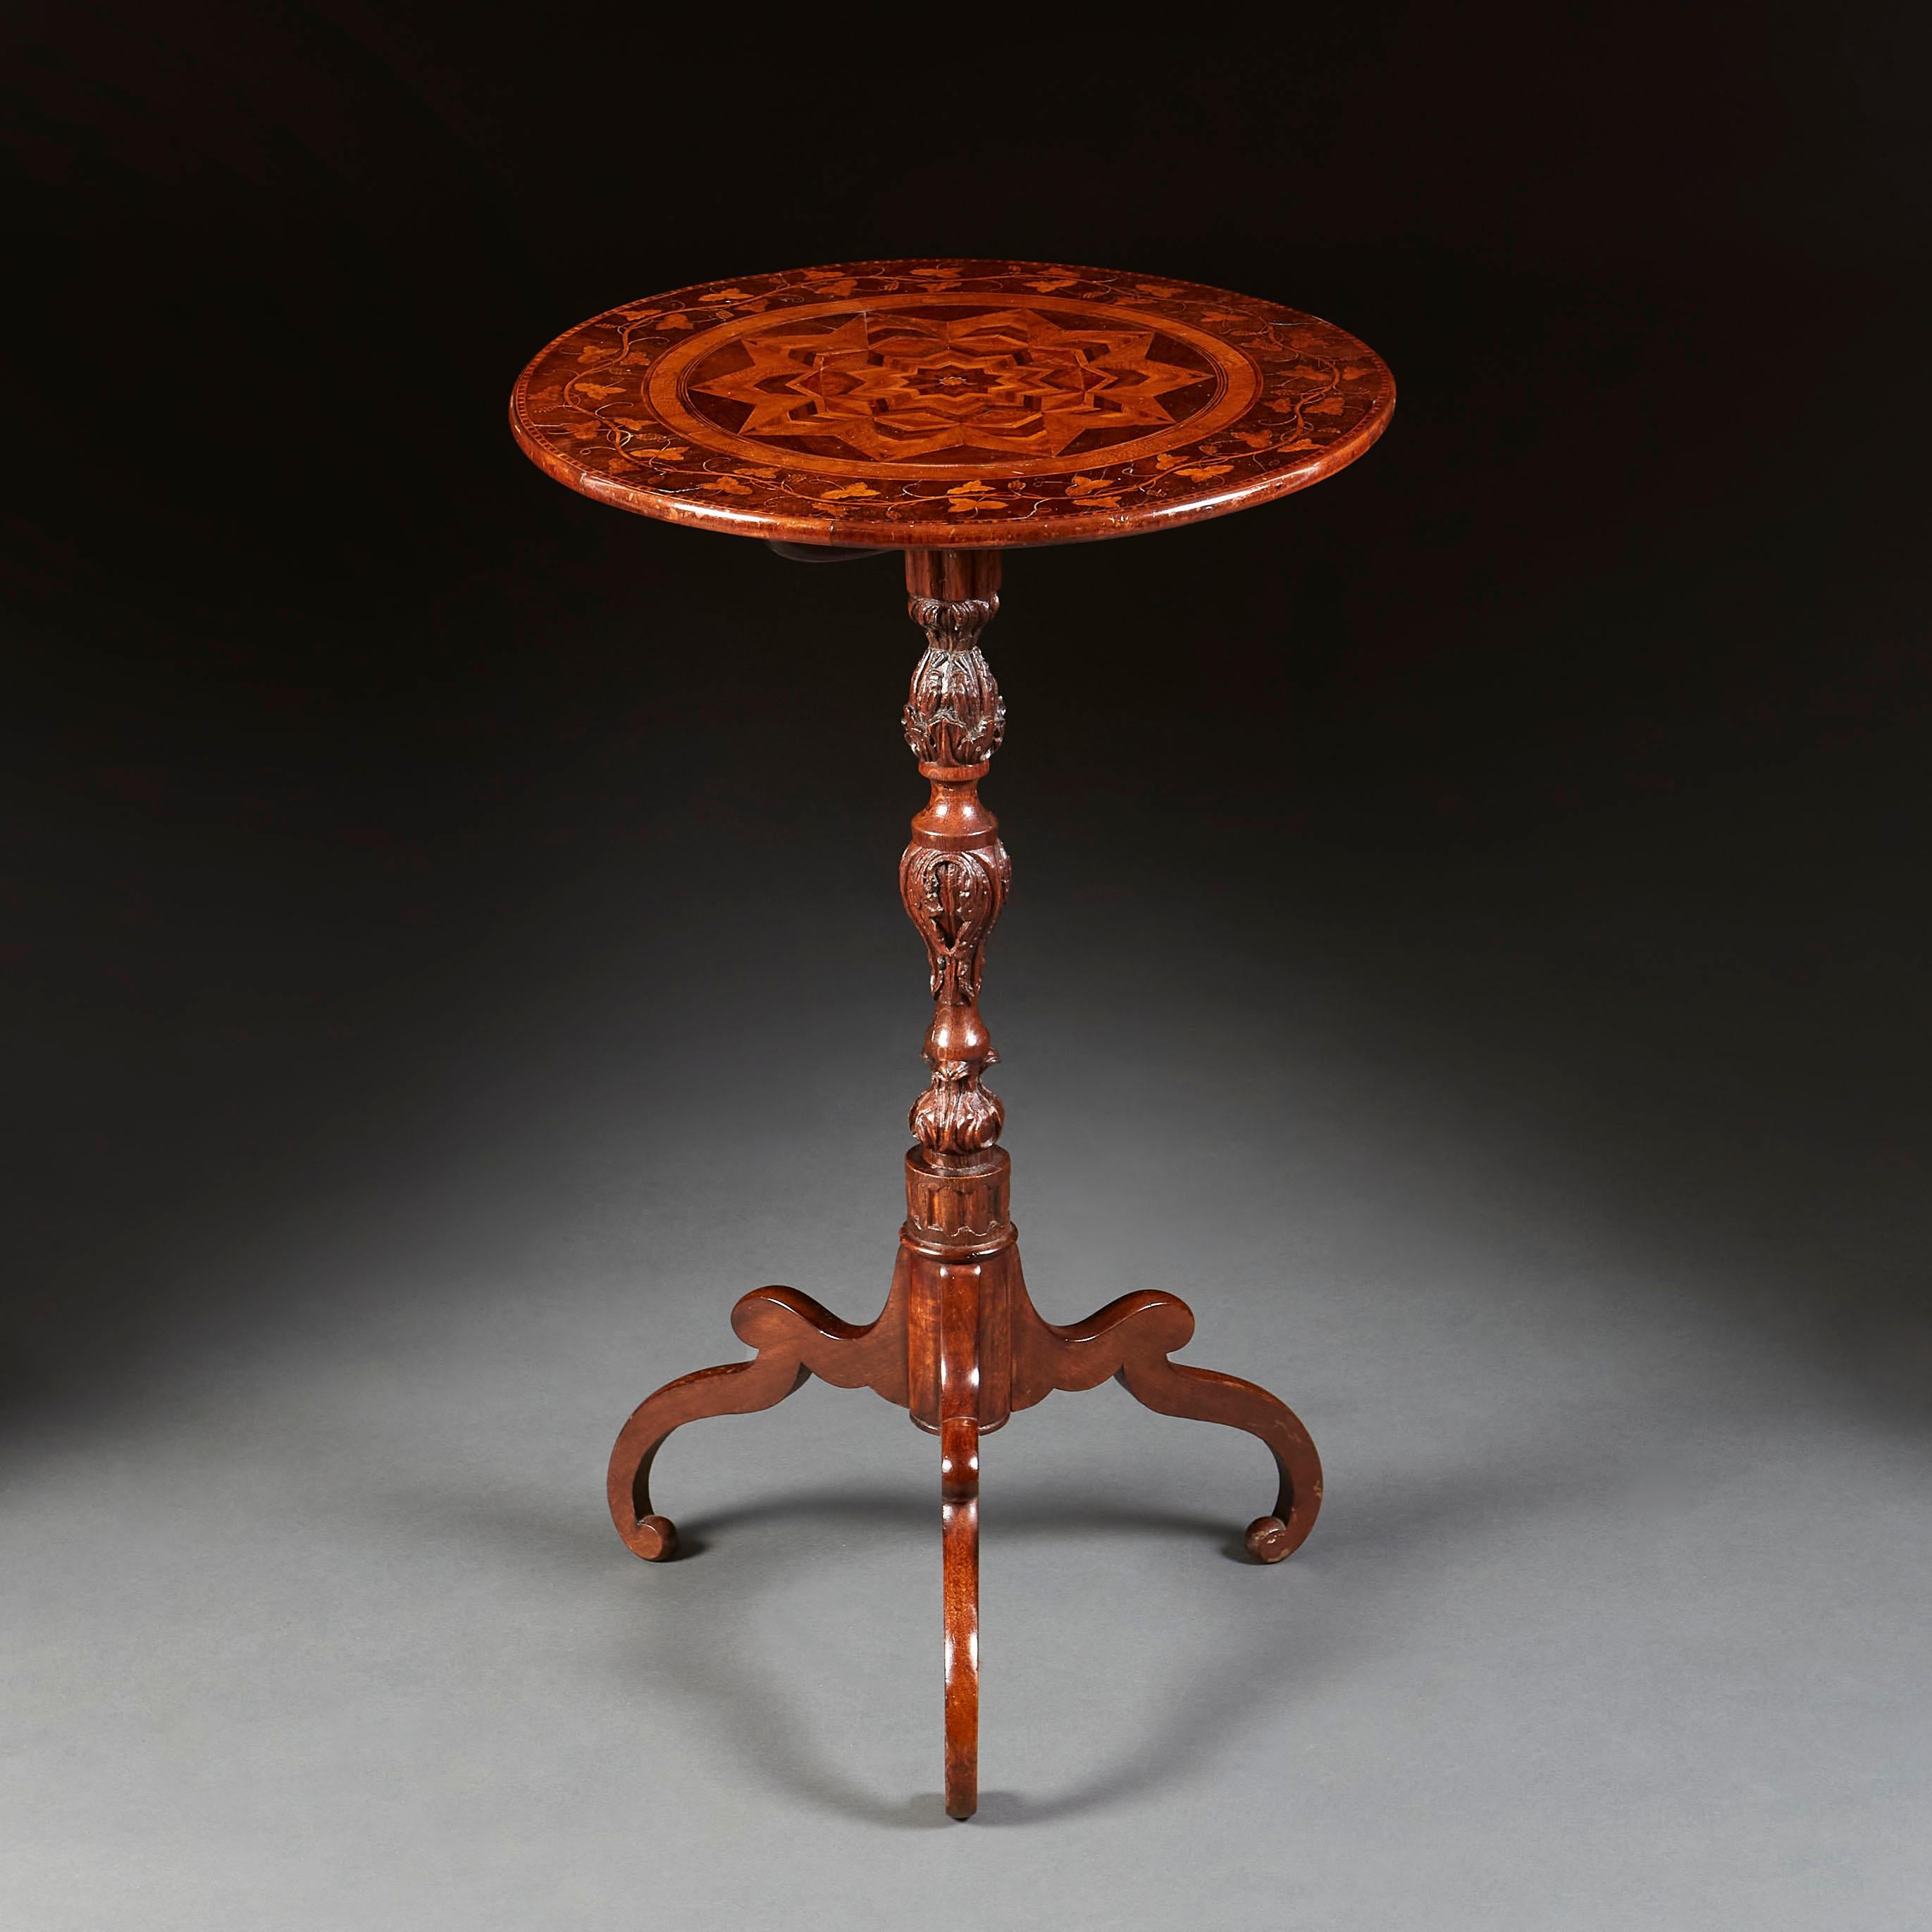 An unusual mid nineteenth century walnut occasional table, the top inlaid with a band of vine leaves and grapes, with central medallion of radiating star, all supported on a turned pedestal, with stylised tripod base.